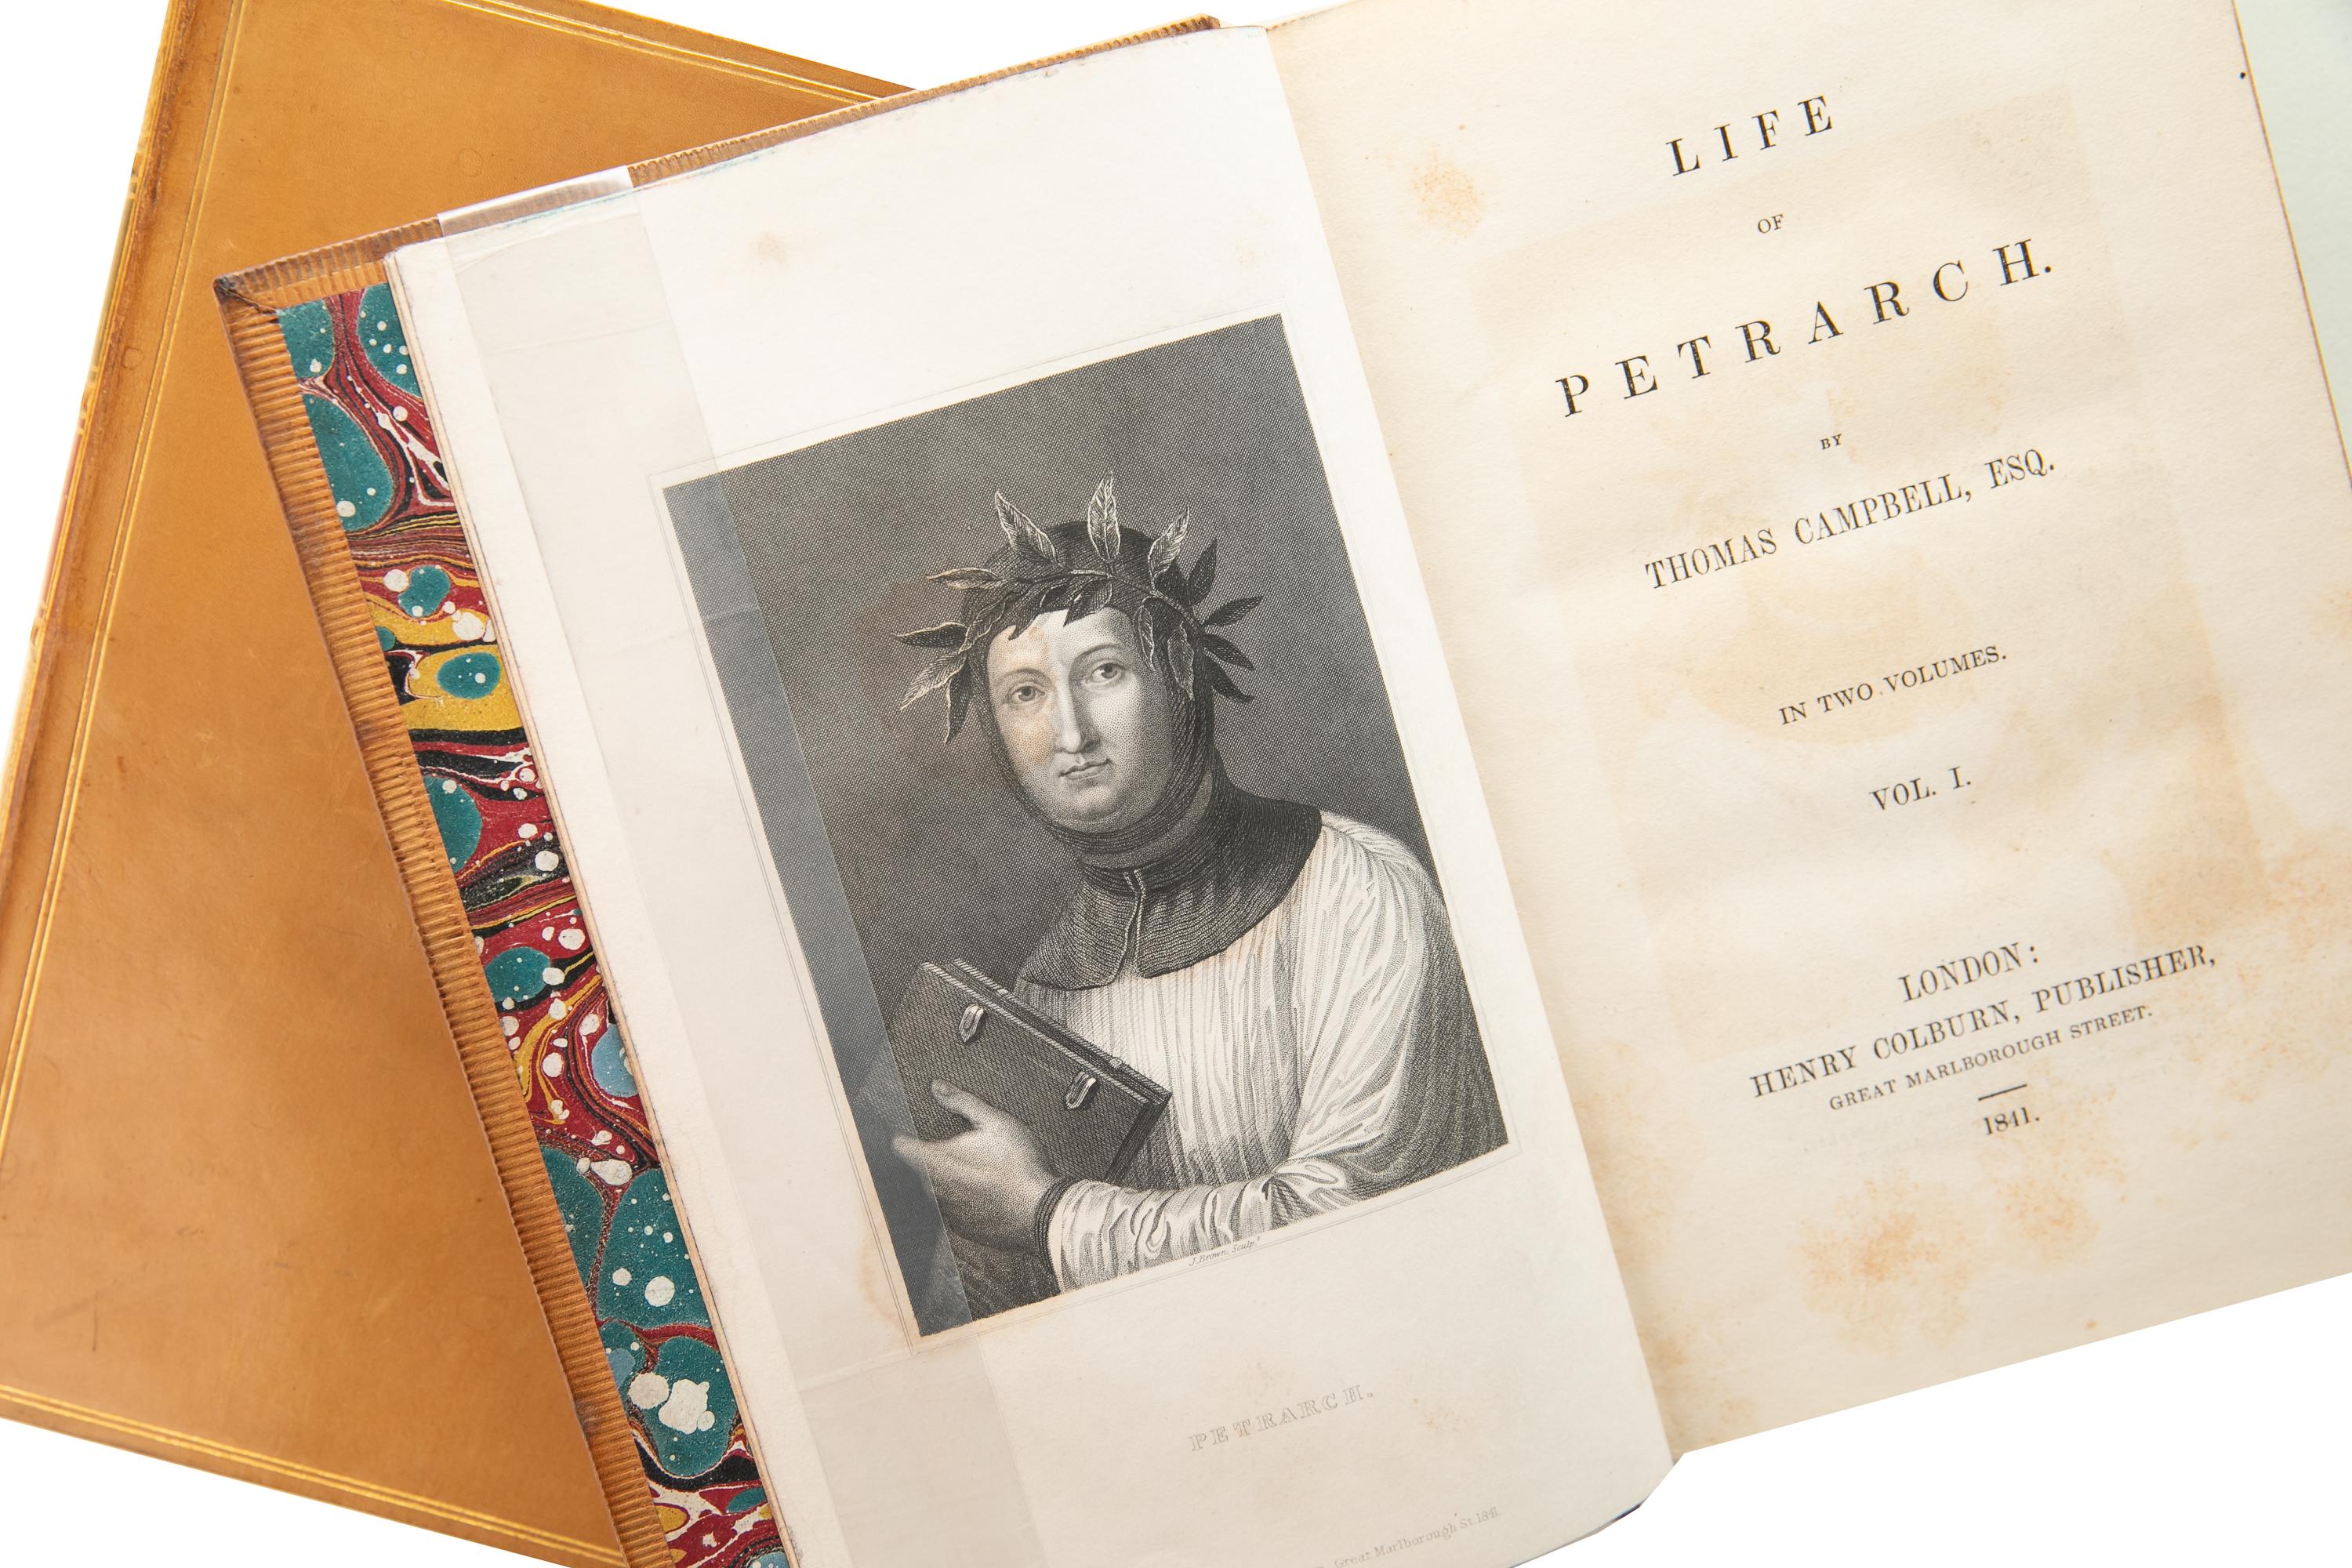 English 2 Volumes. Thomas Campbell, Life of Petrarch. For Sale